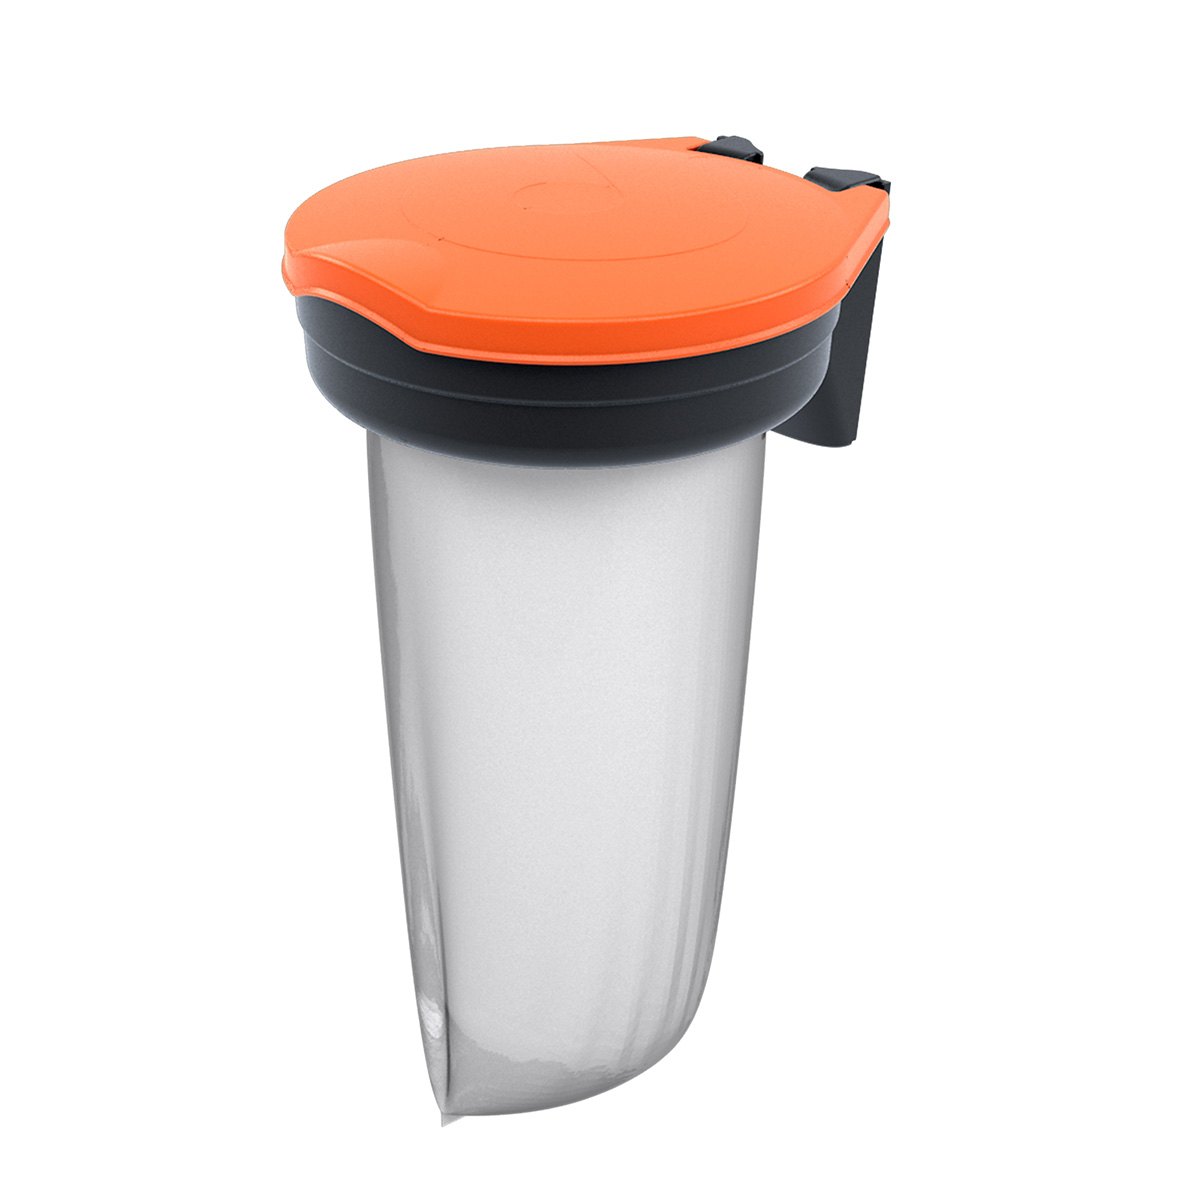 Skipper™ Barrier Recycling Bin Orange Lid - Requires Post Collar to Attach to The Skipper Post And Base System